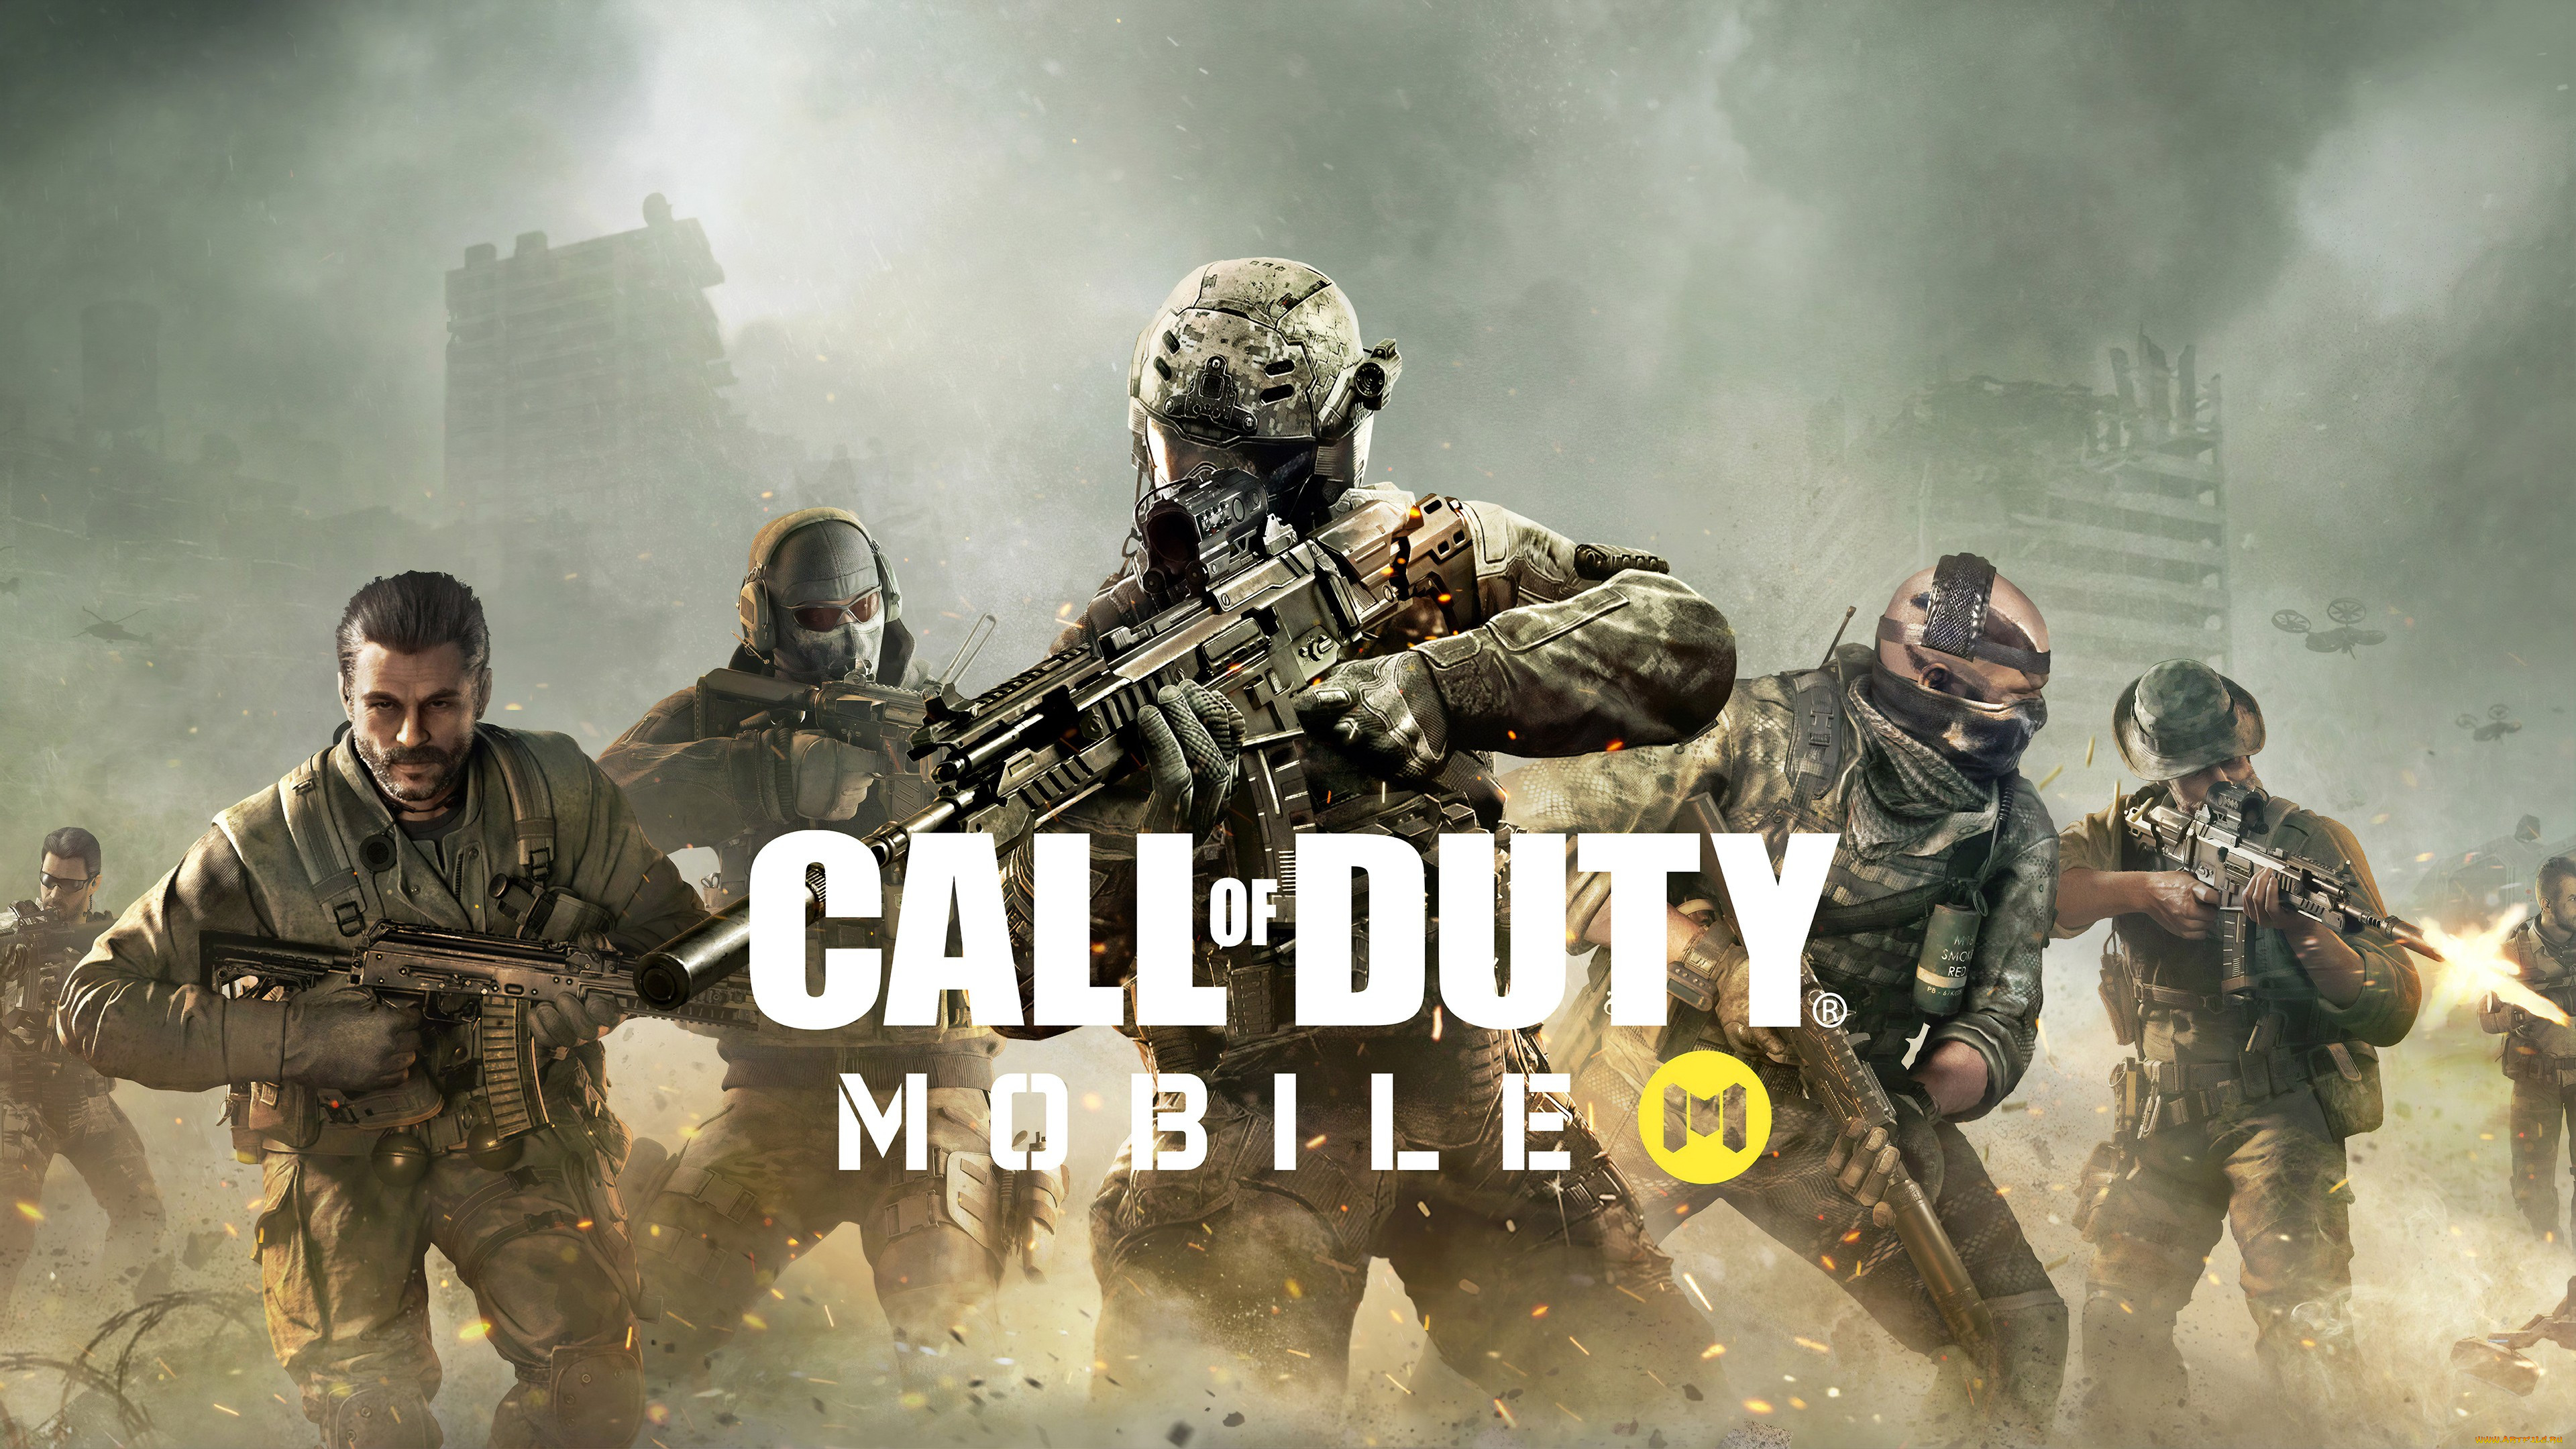  , call of duty,  mobile, call, of, duty, mobile